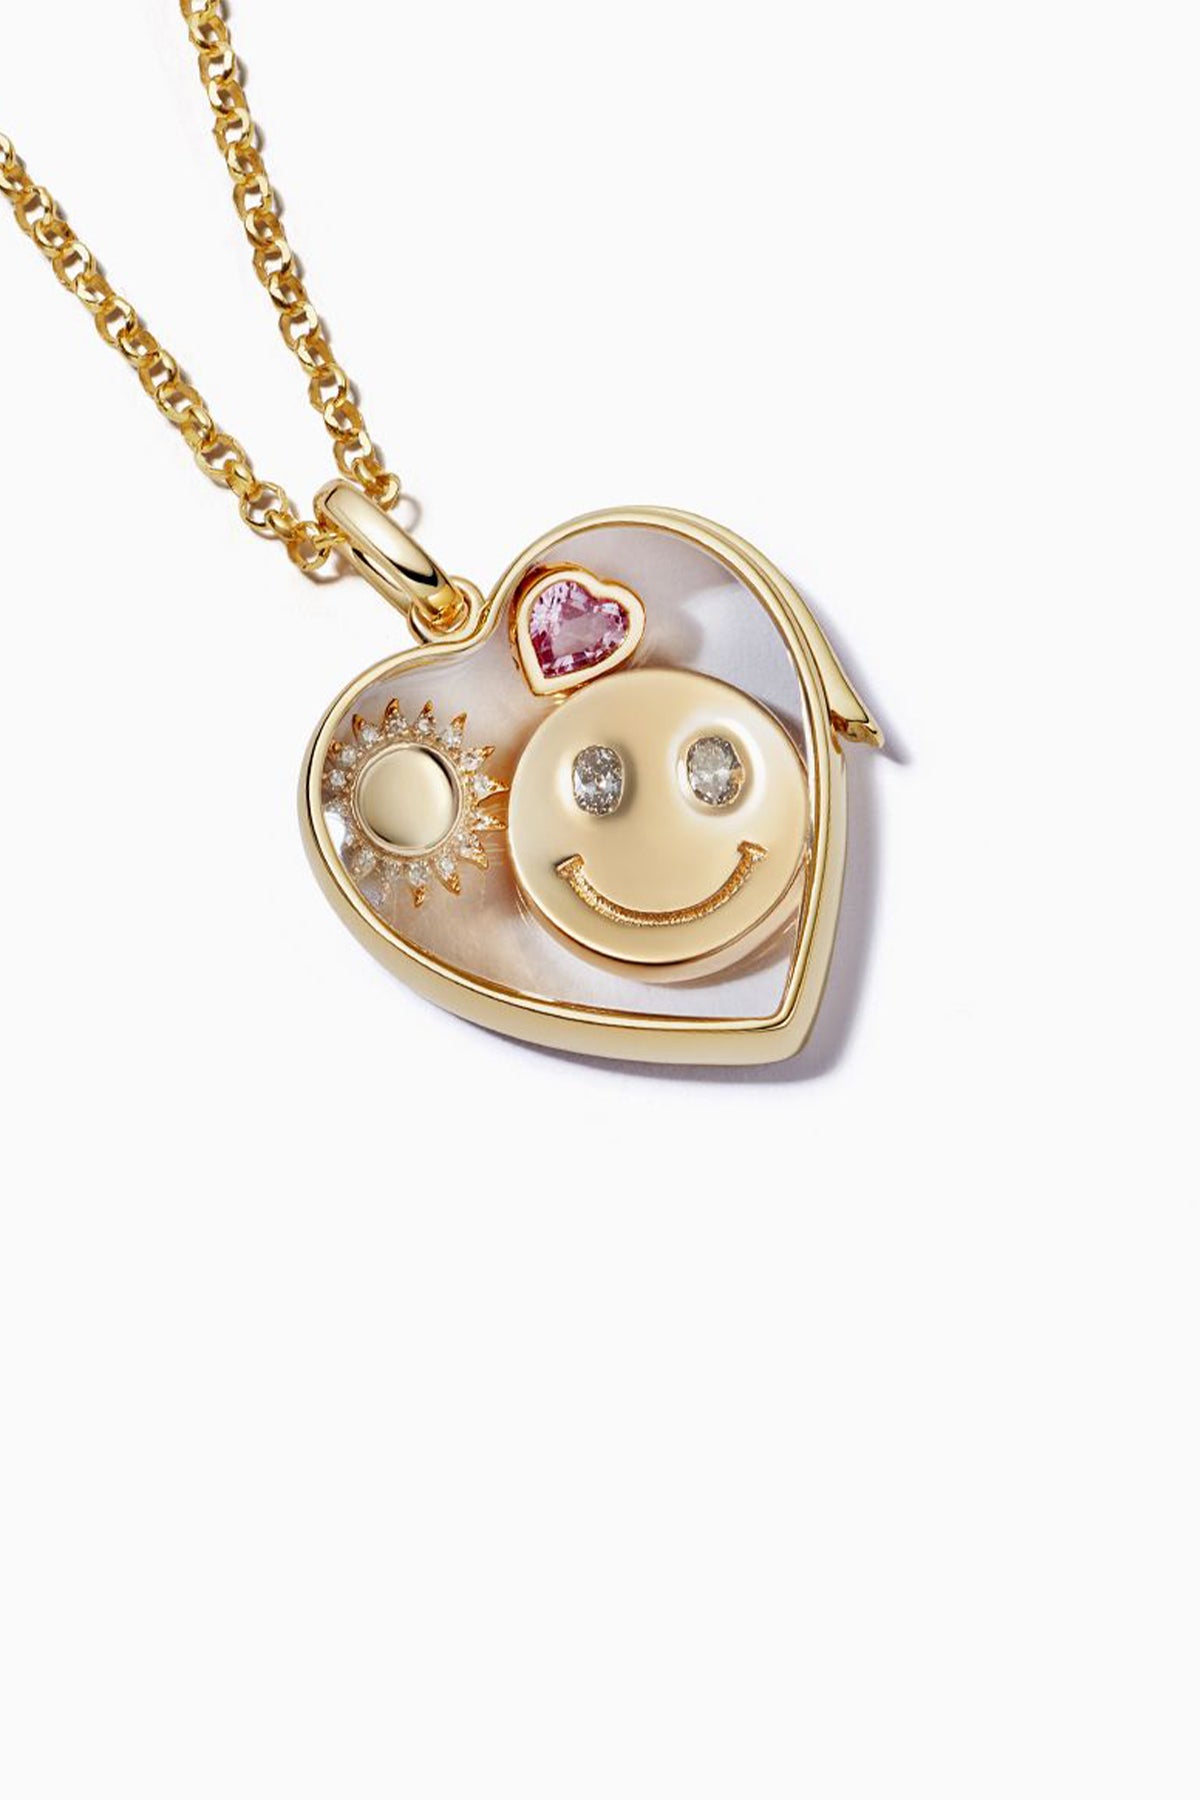 LOQUET LONDON | SMILEY FACE CHARM